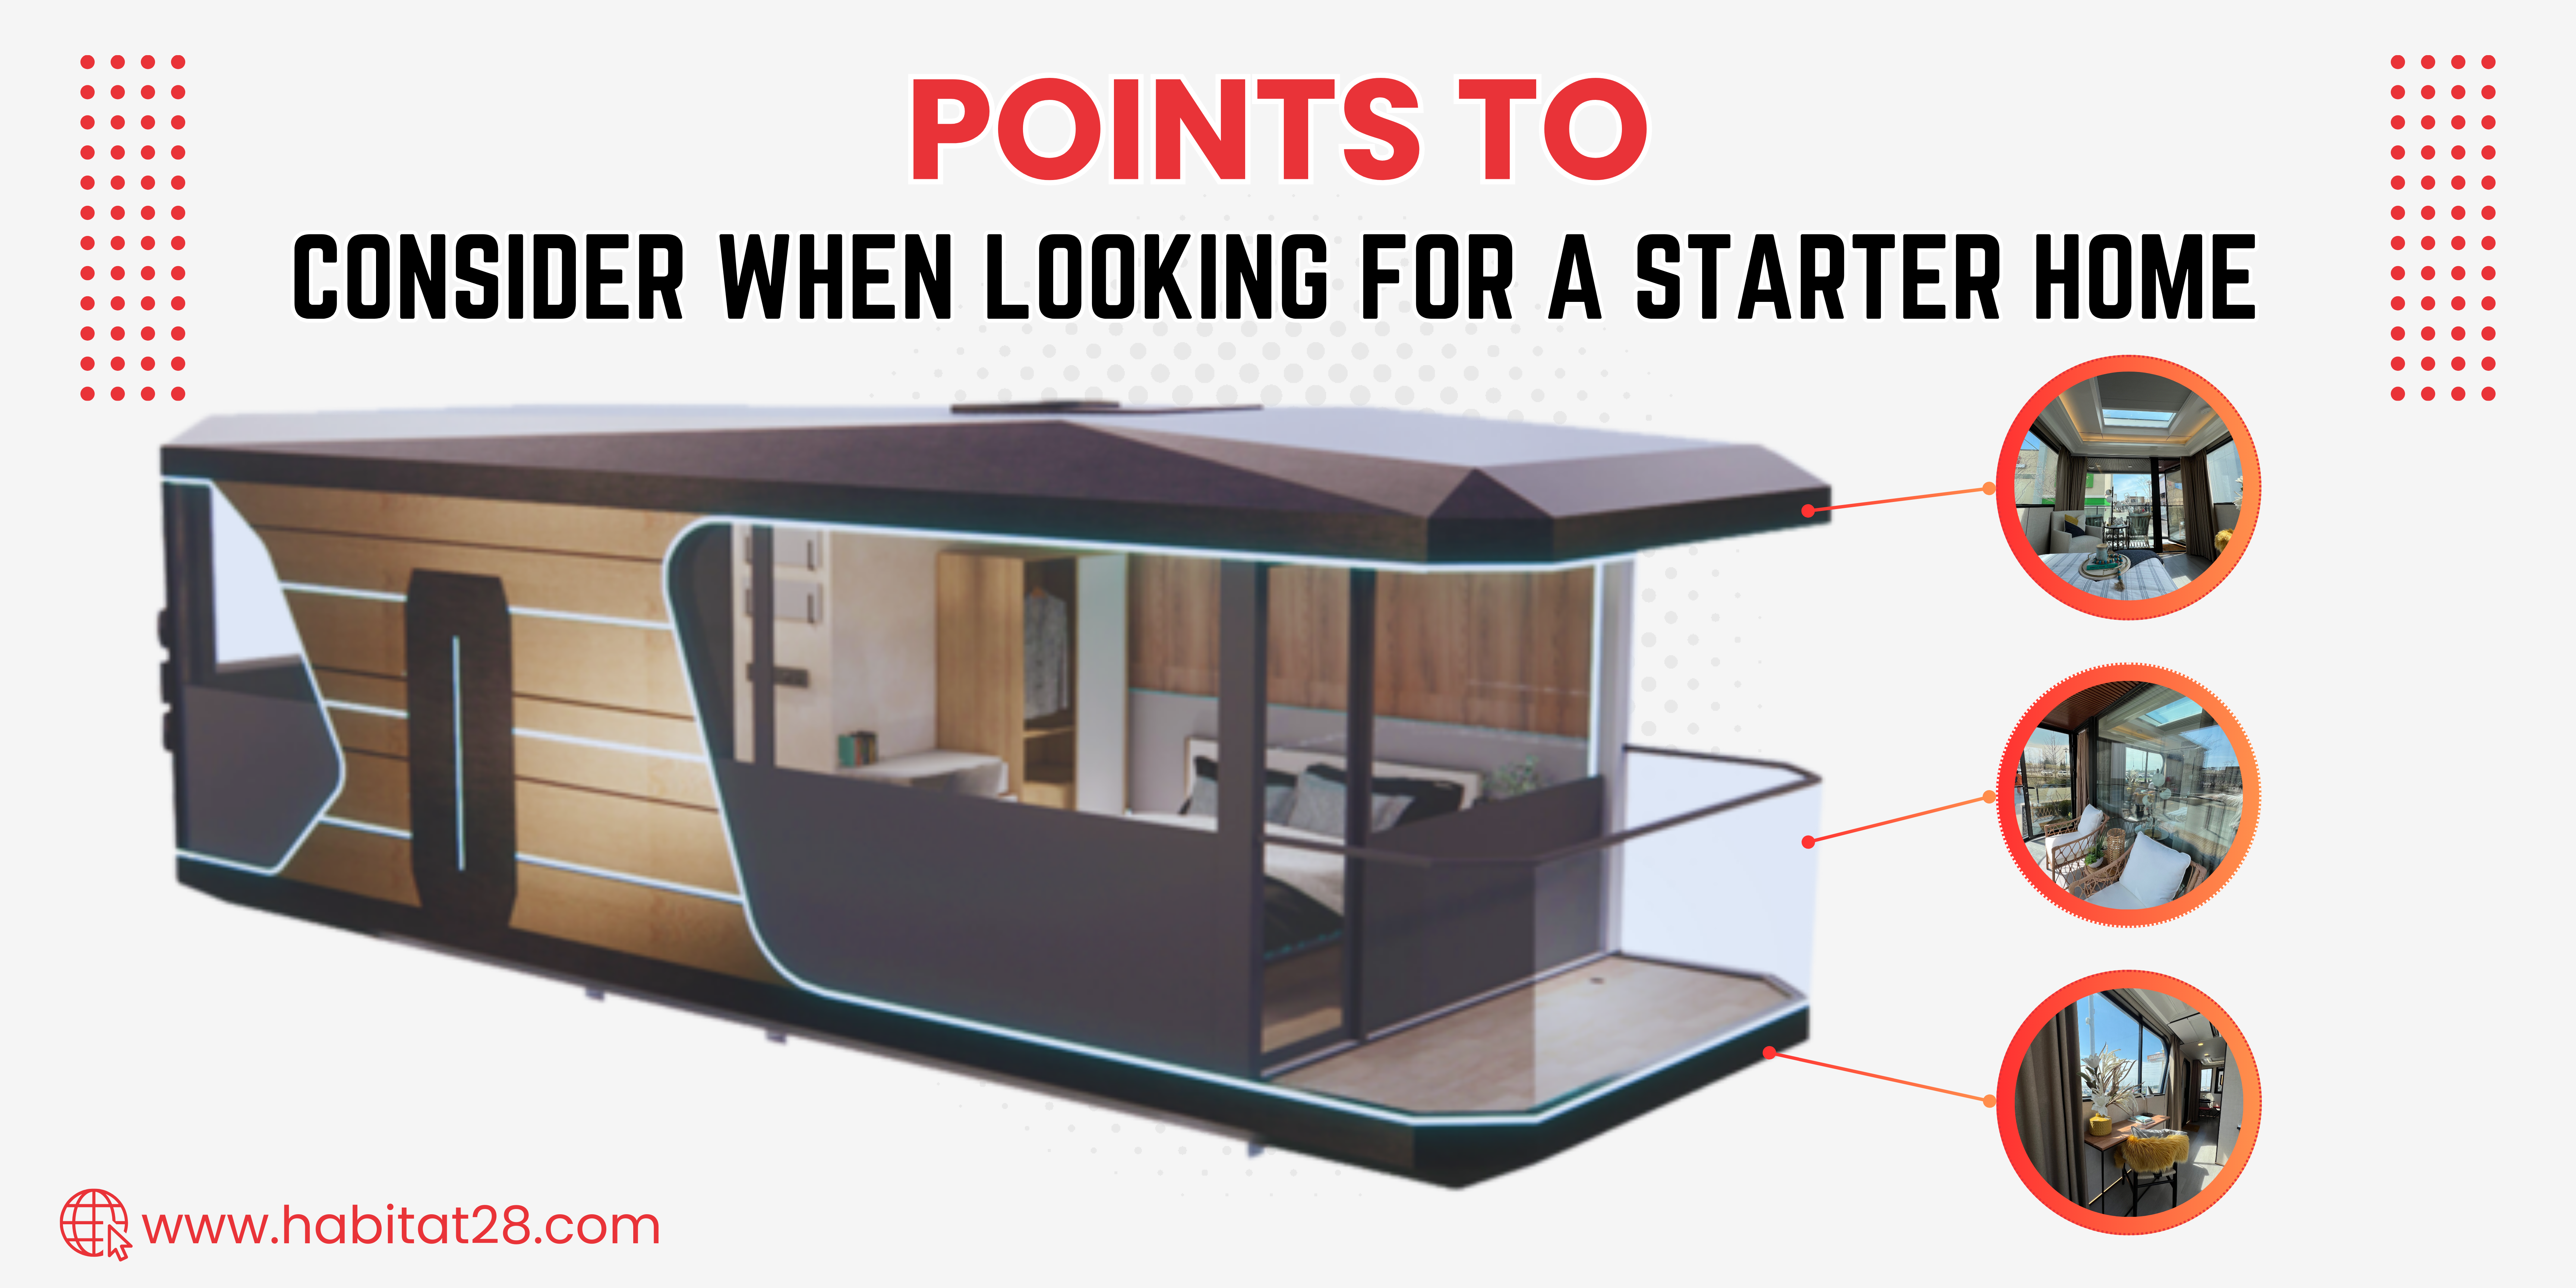 Points to Consider When Looking for a Starter Home